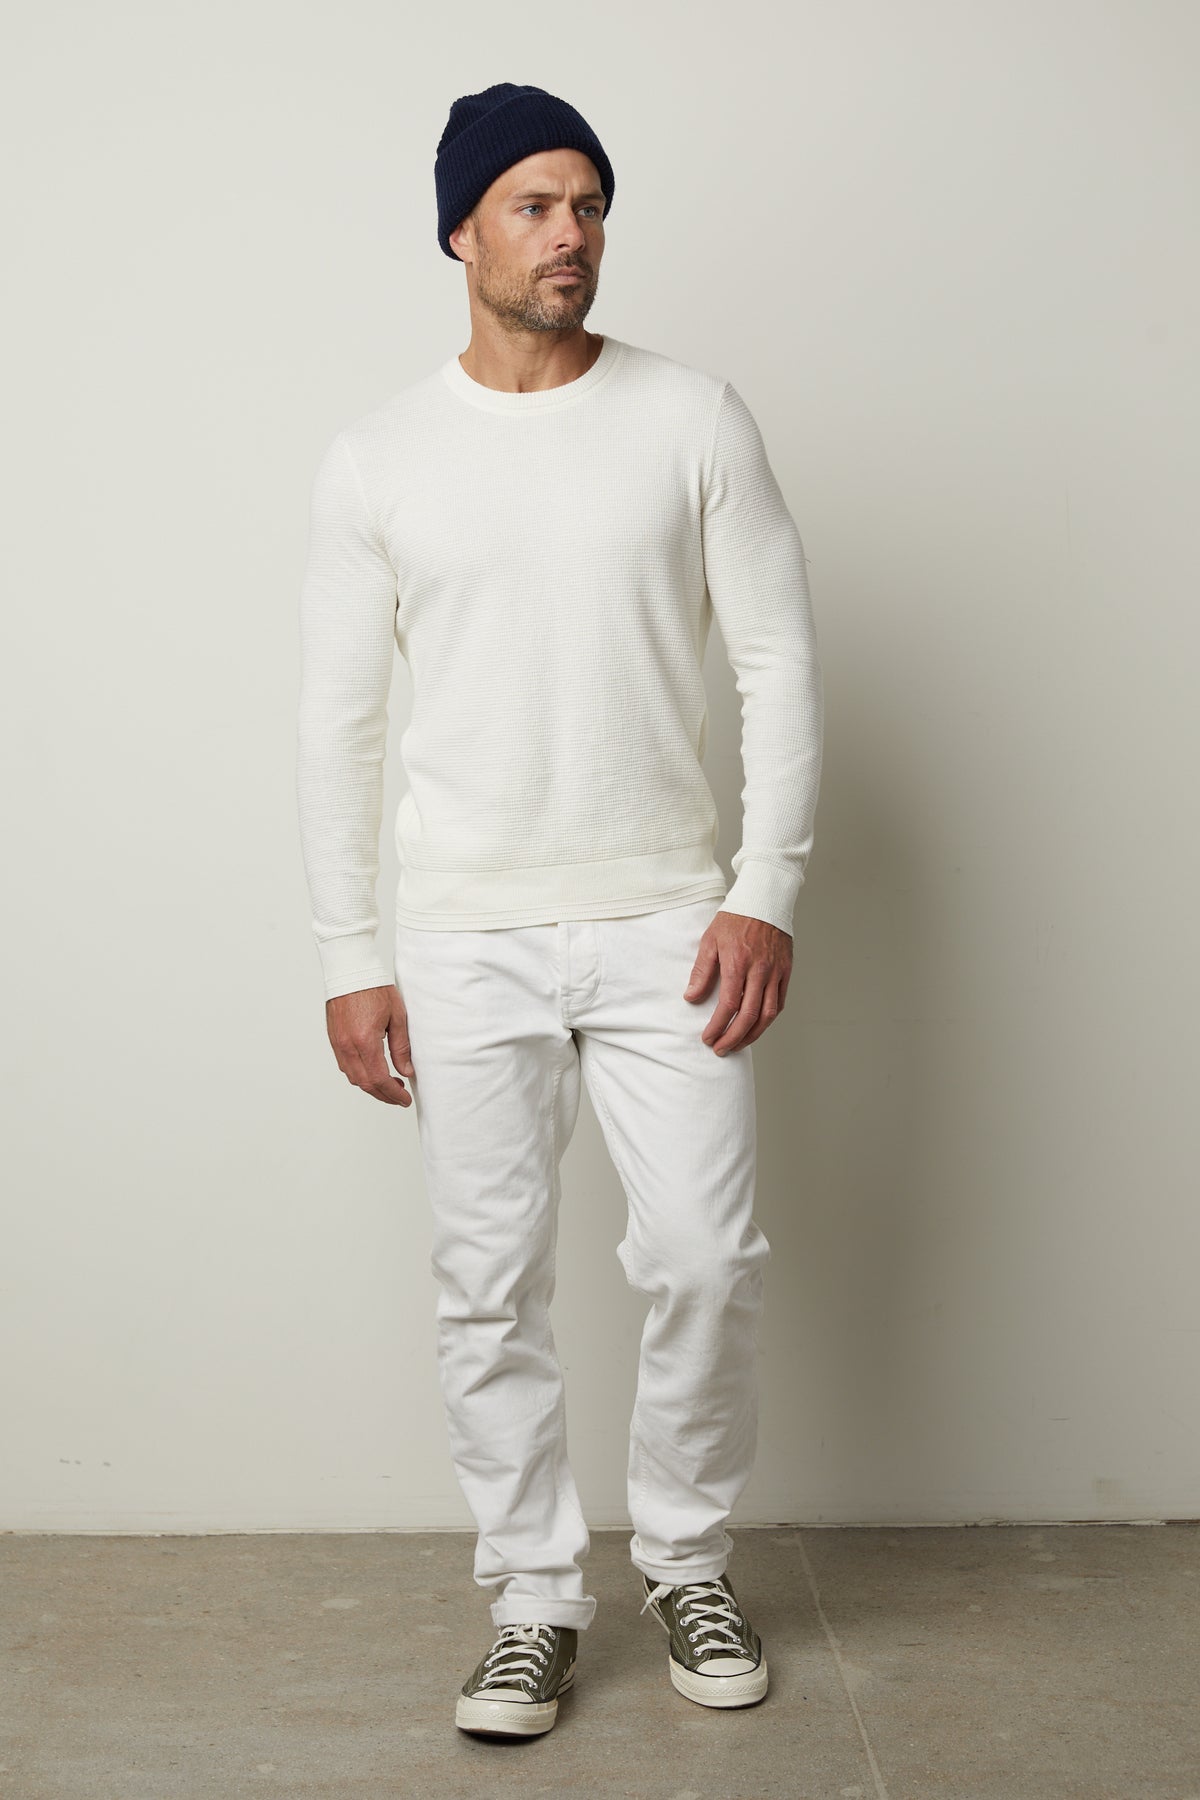 A man wearing a Velvet by Graham & Spencer WALTER CREW NECK SWEATER and jeans.-26846174412993